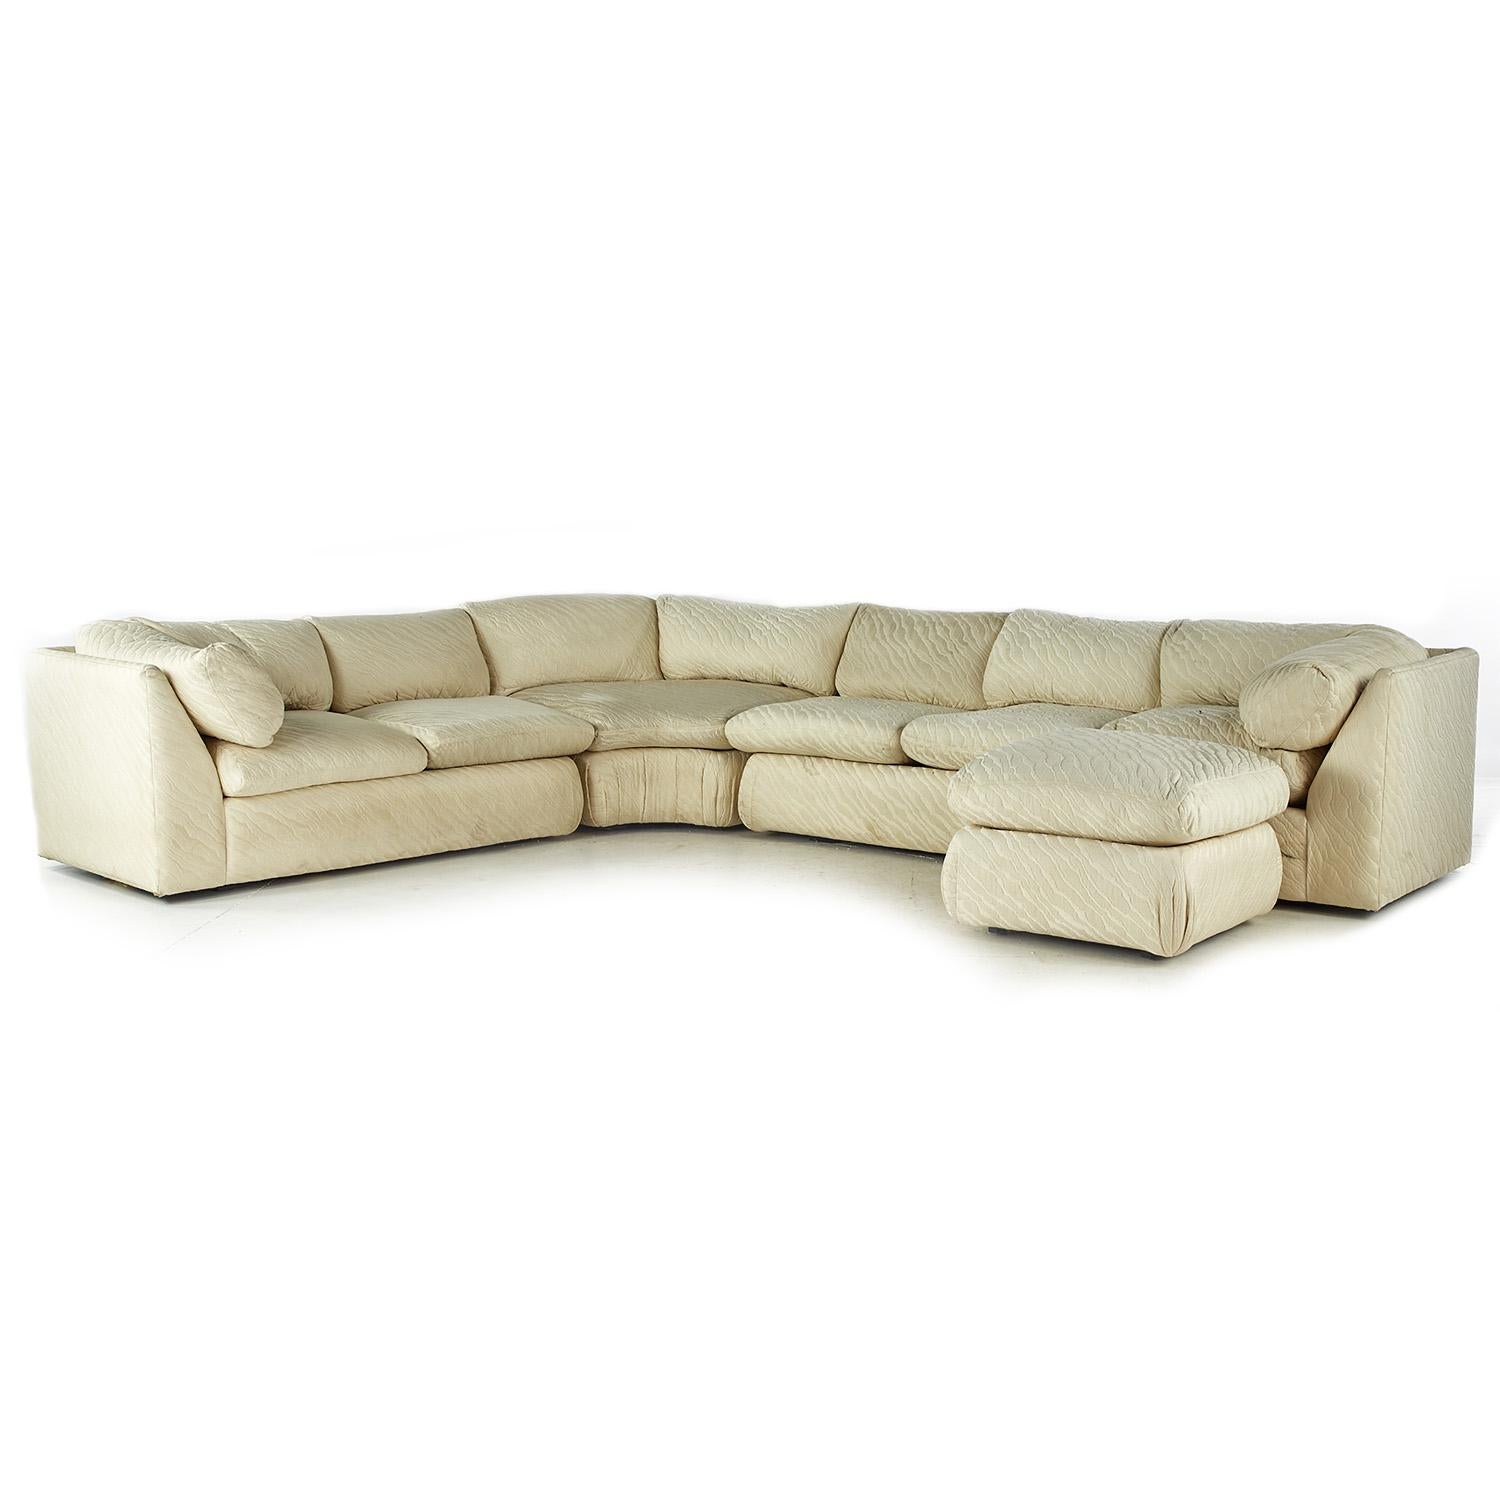 Thayer Coggin midcentury sectional sofa

This sofa measures: 103 wide x 127 deep x 28.5 inches high, with a seat height of 17.5 and arm height of 28.5 inches

All pieces of furniture can be had in what we call restored vintage condition. That